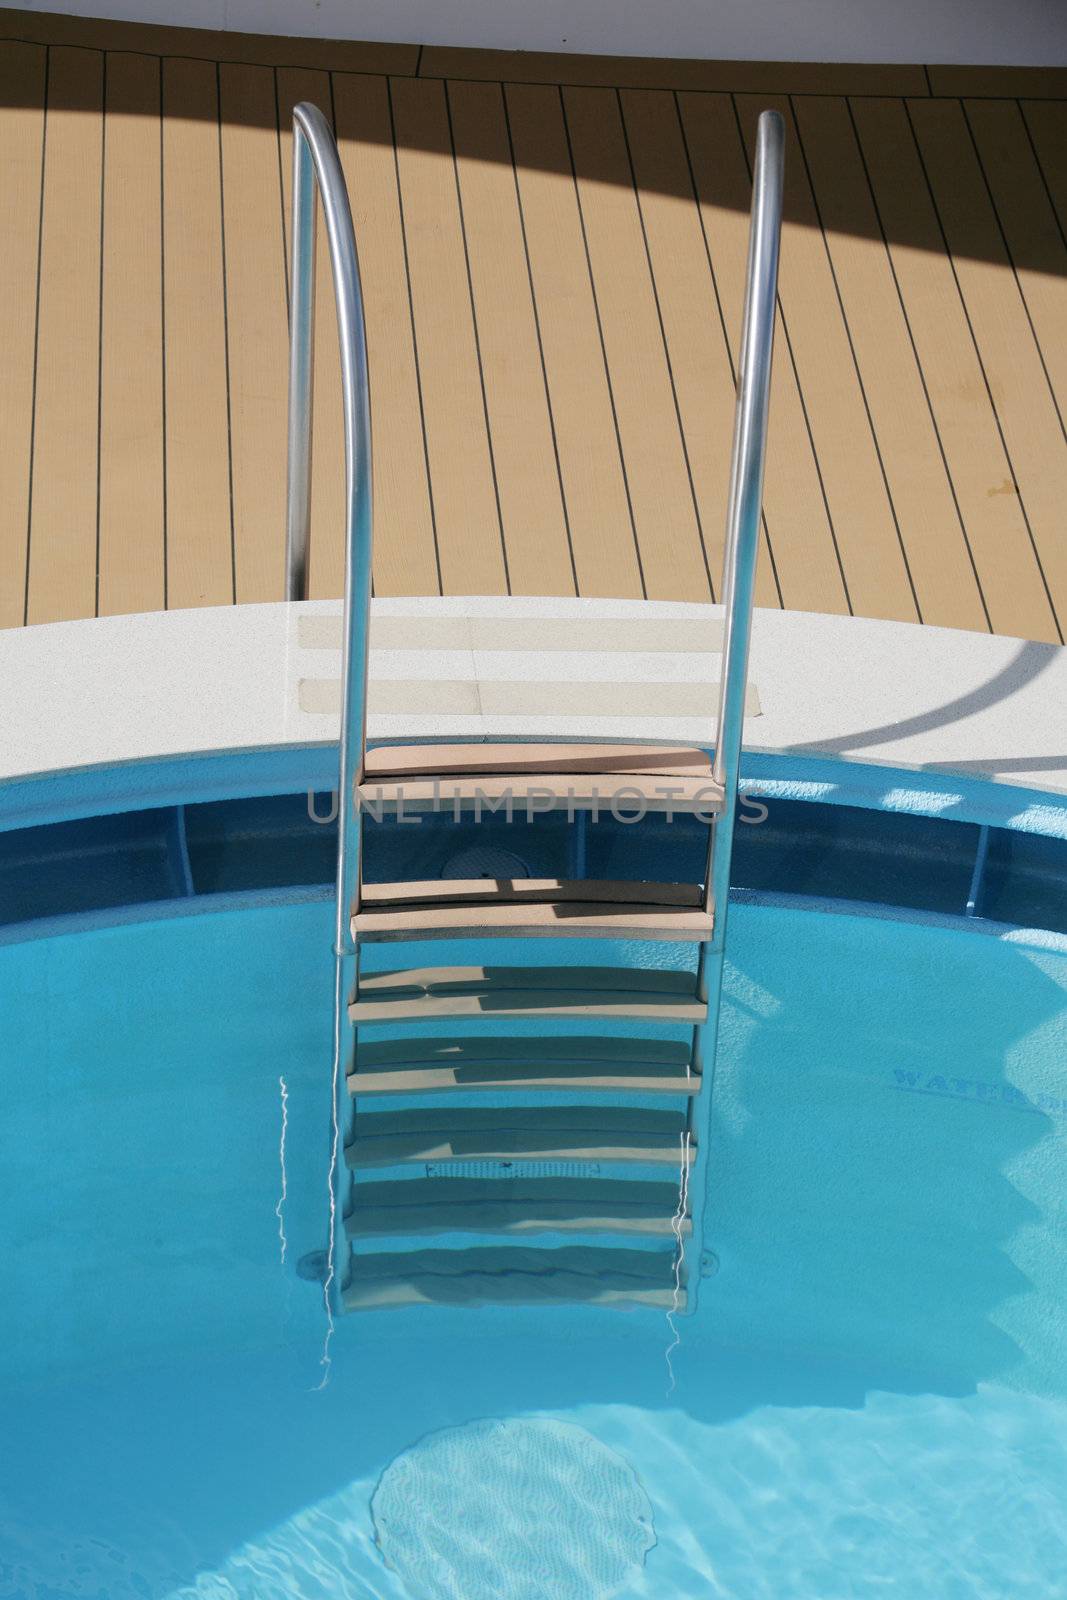 Pool ladder and swimming pool